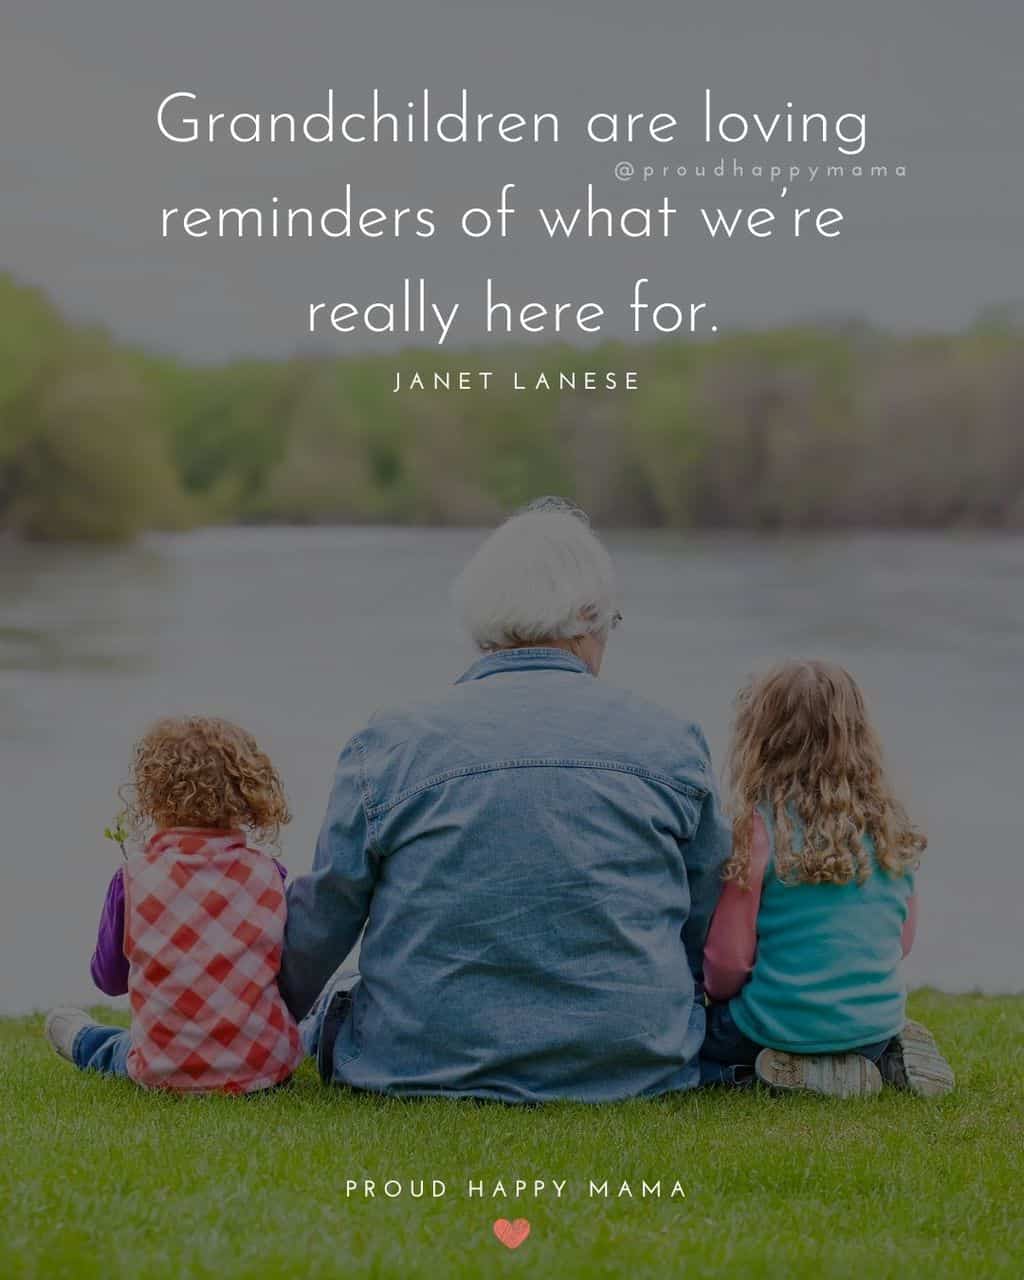 Granddaughter Quotes - Grandchildren are loving reminders of what we’re really here for.’ — Janet Lanese